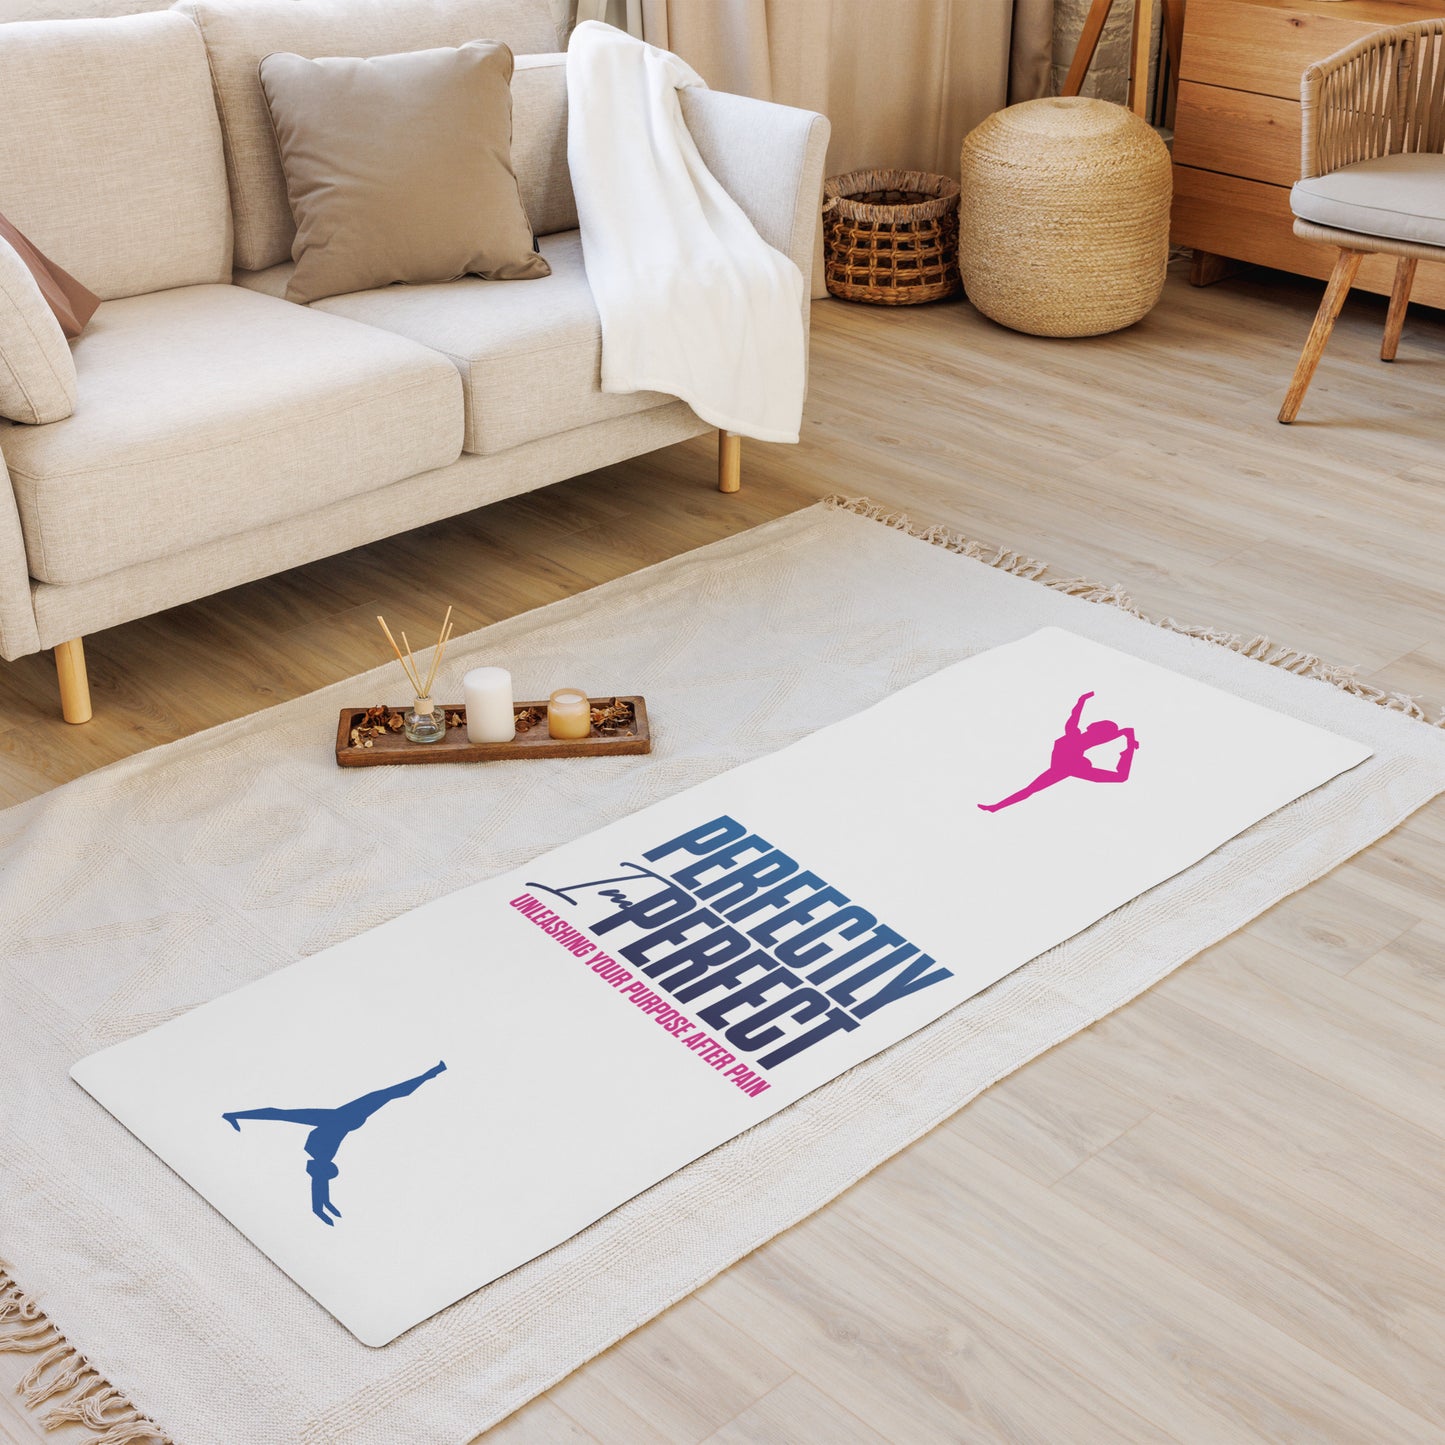 Perfectly Imperfect Yoga mat